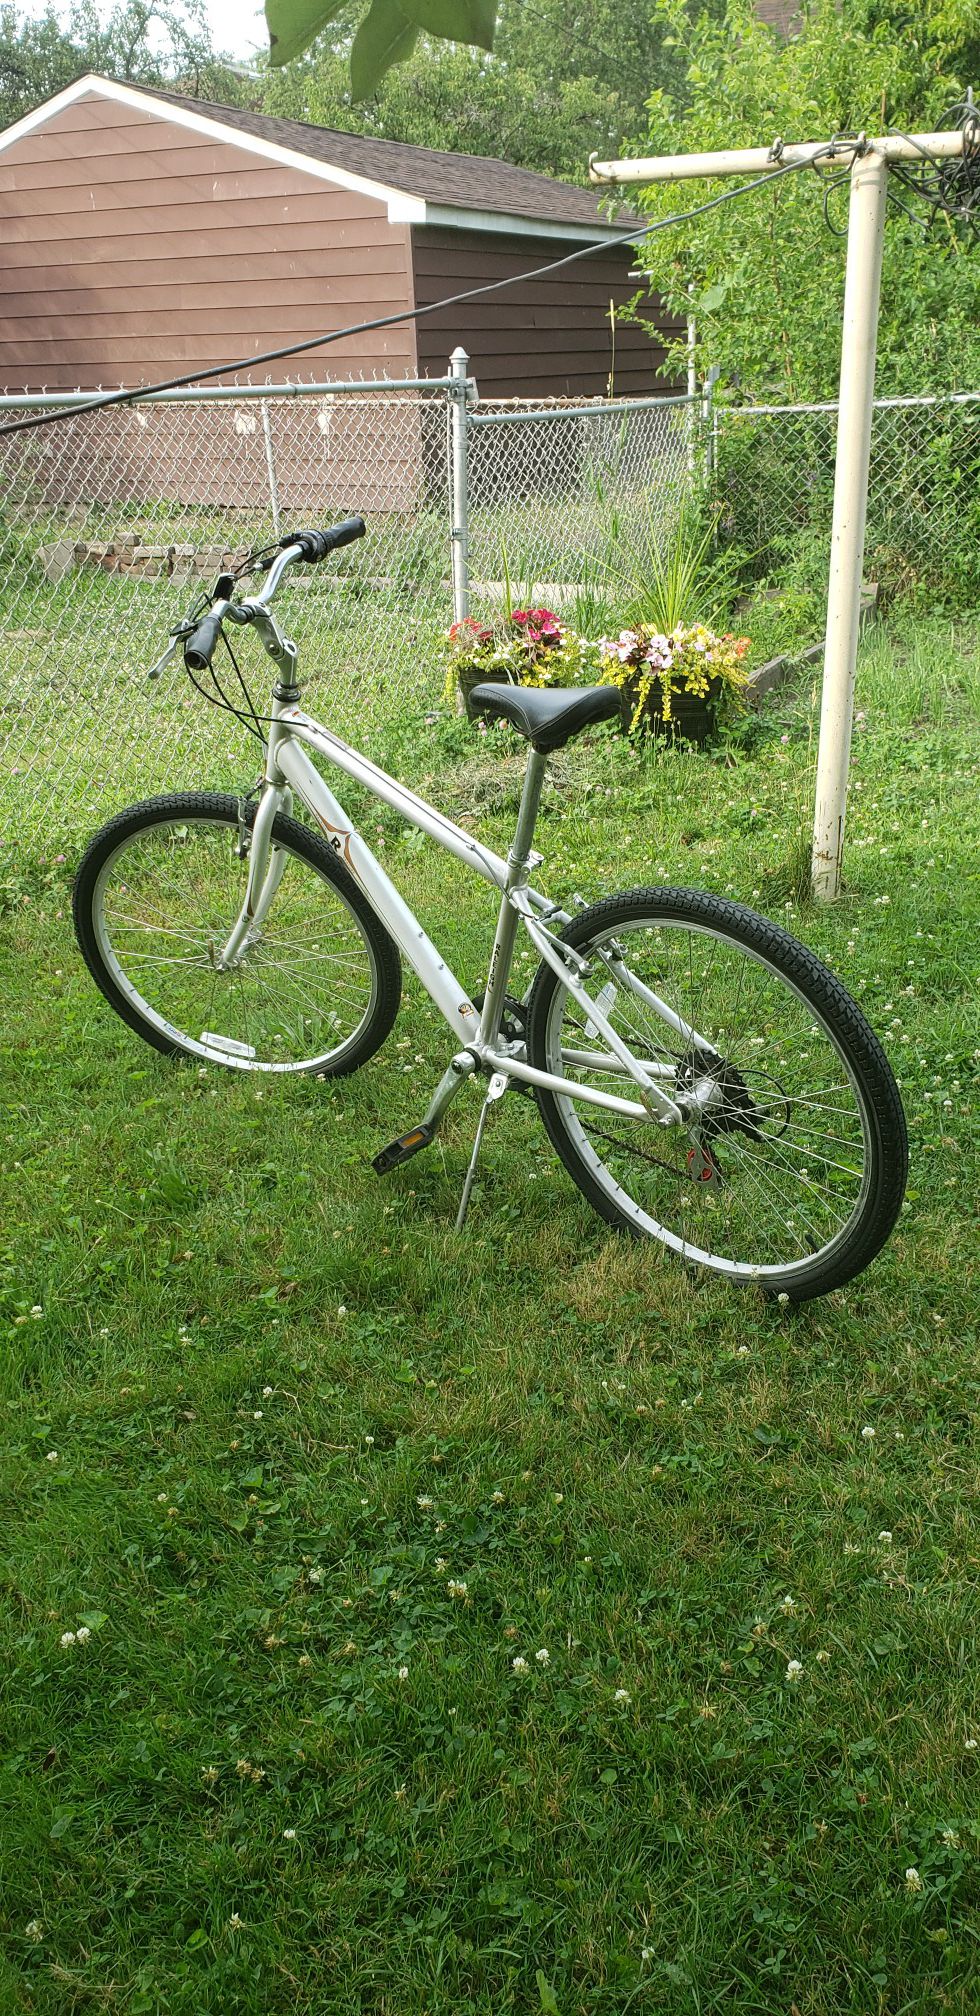 Raleigh venture bike, 26 inches tires size. High end bike, perfect condition.